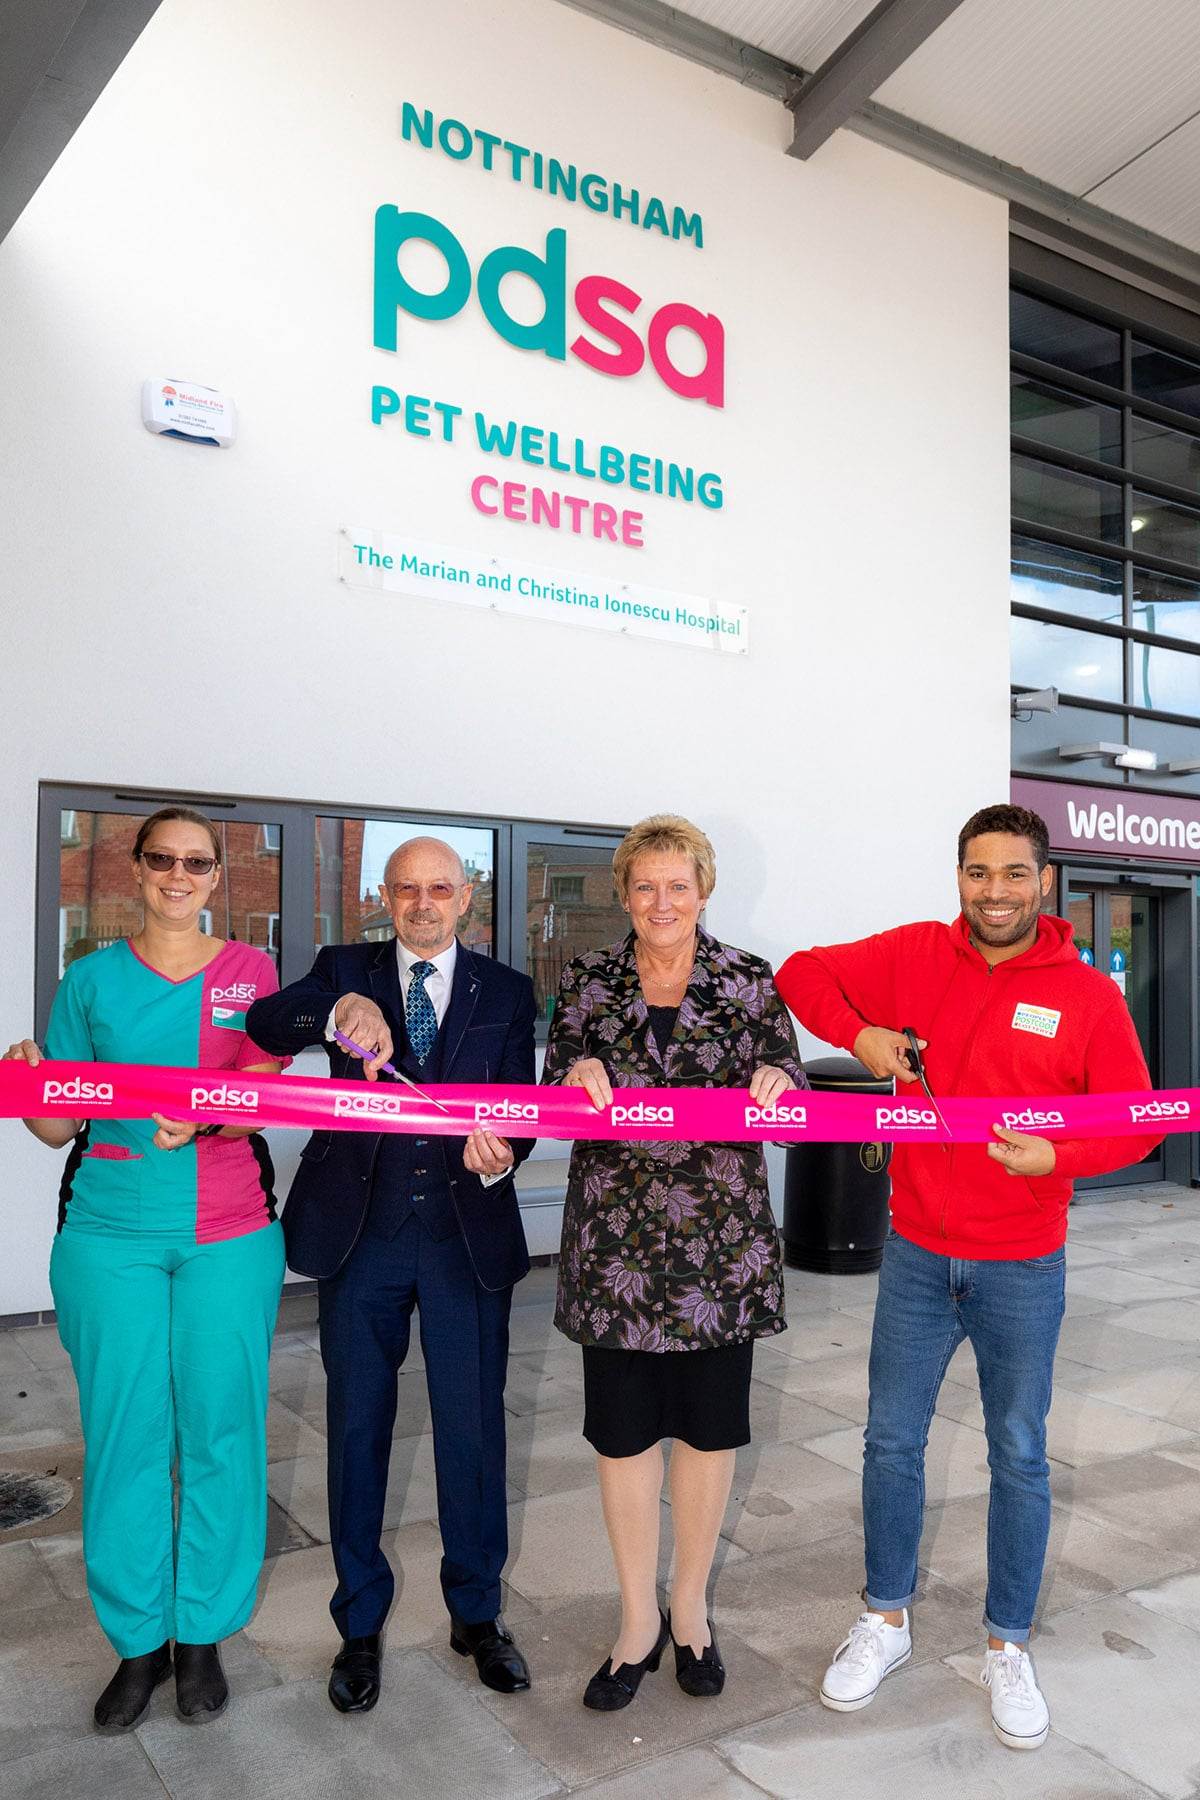 Cutting the ribbon to open new P.d.s.a pet wellbeing Centre 